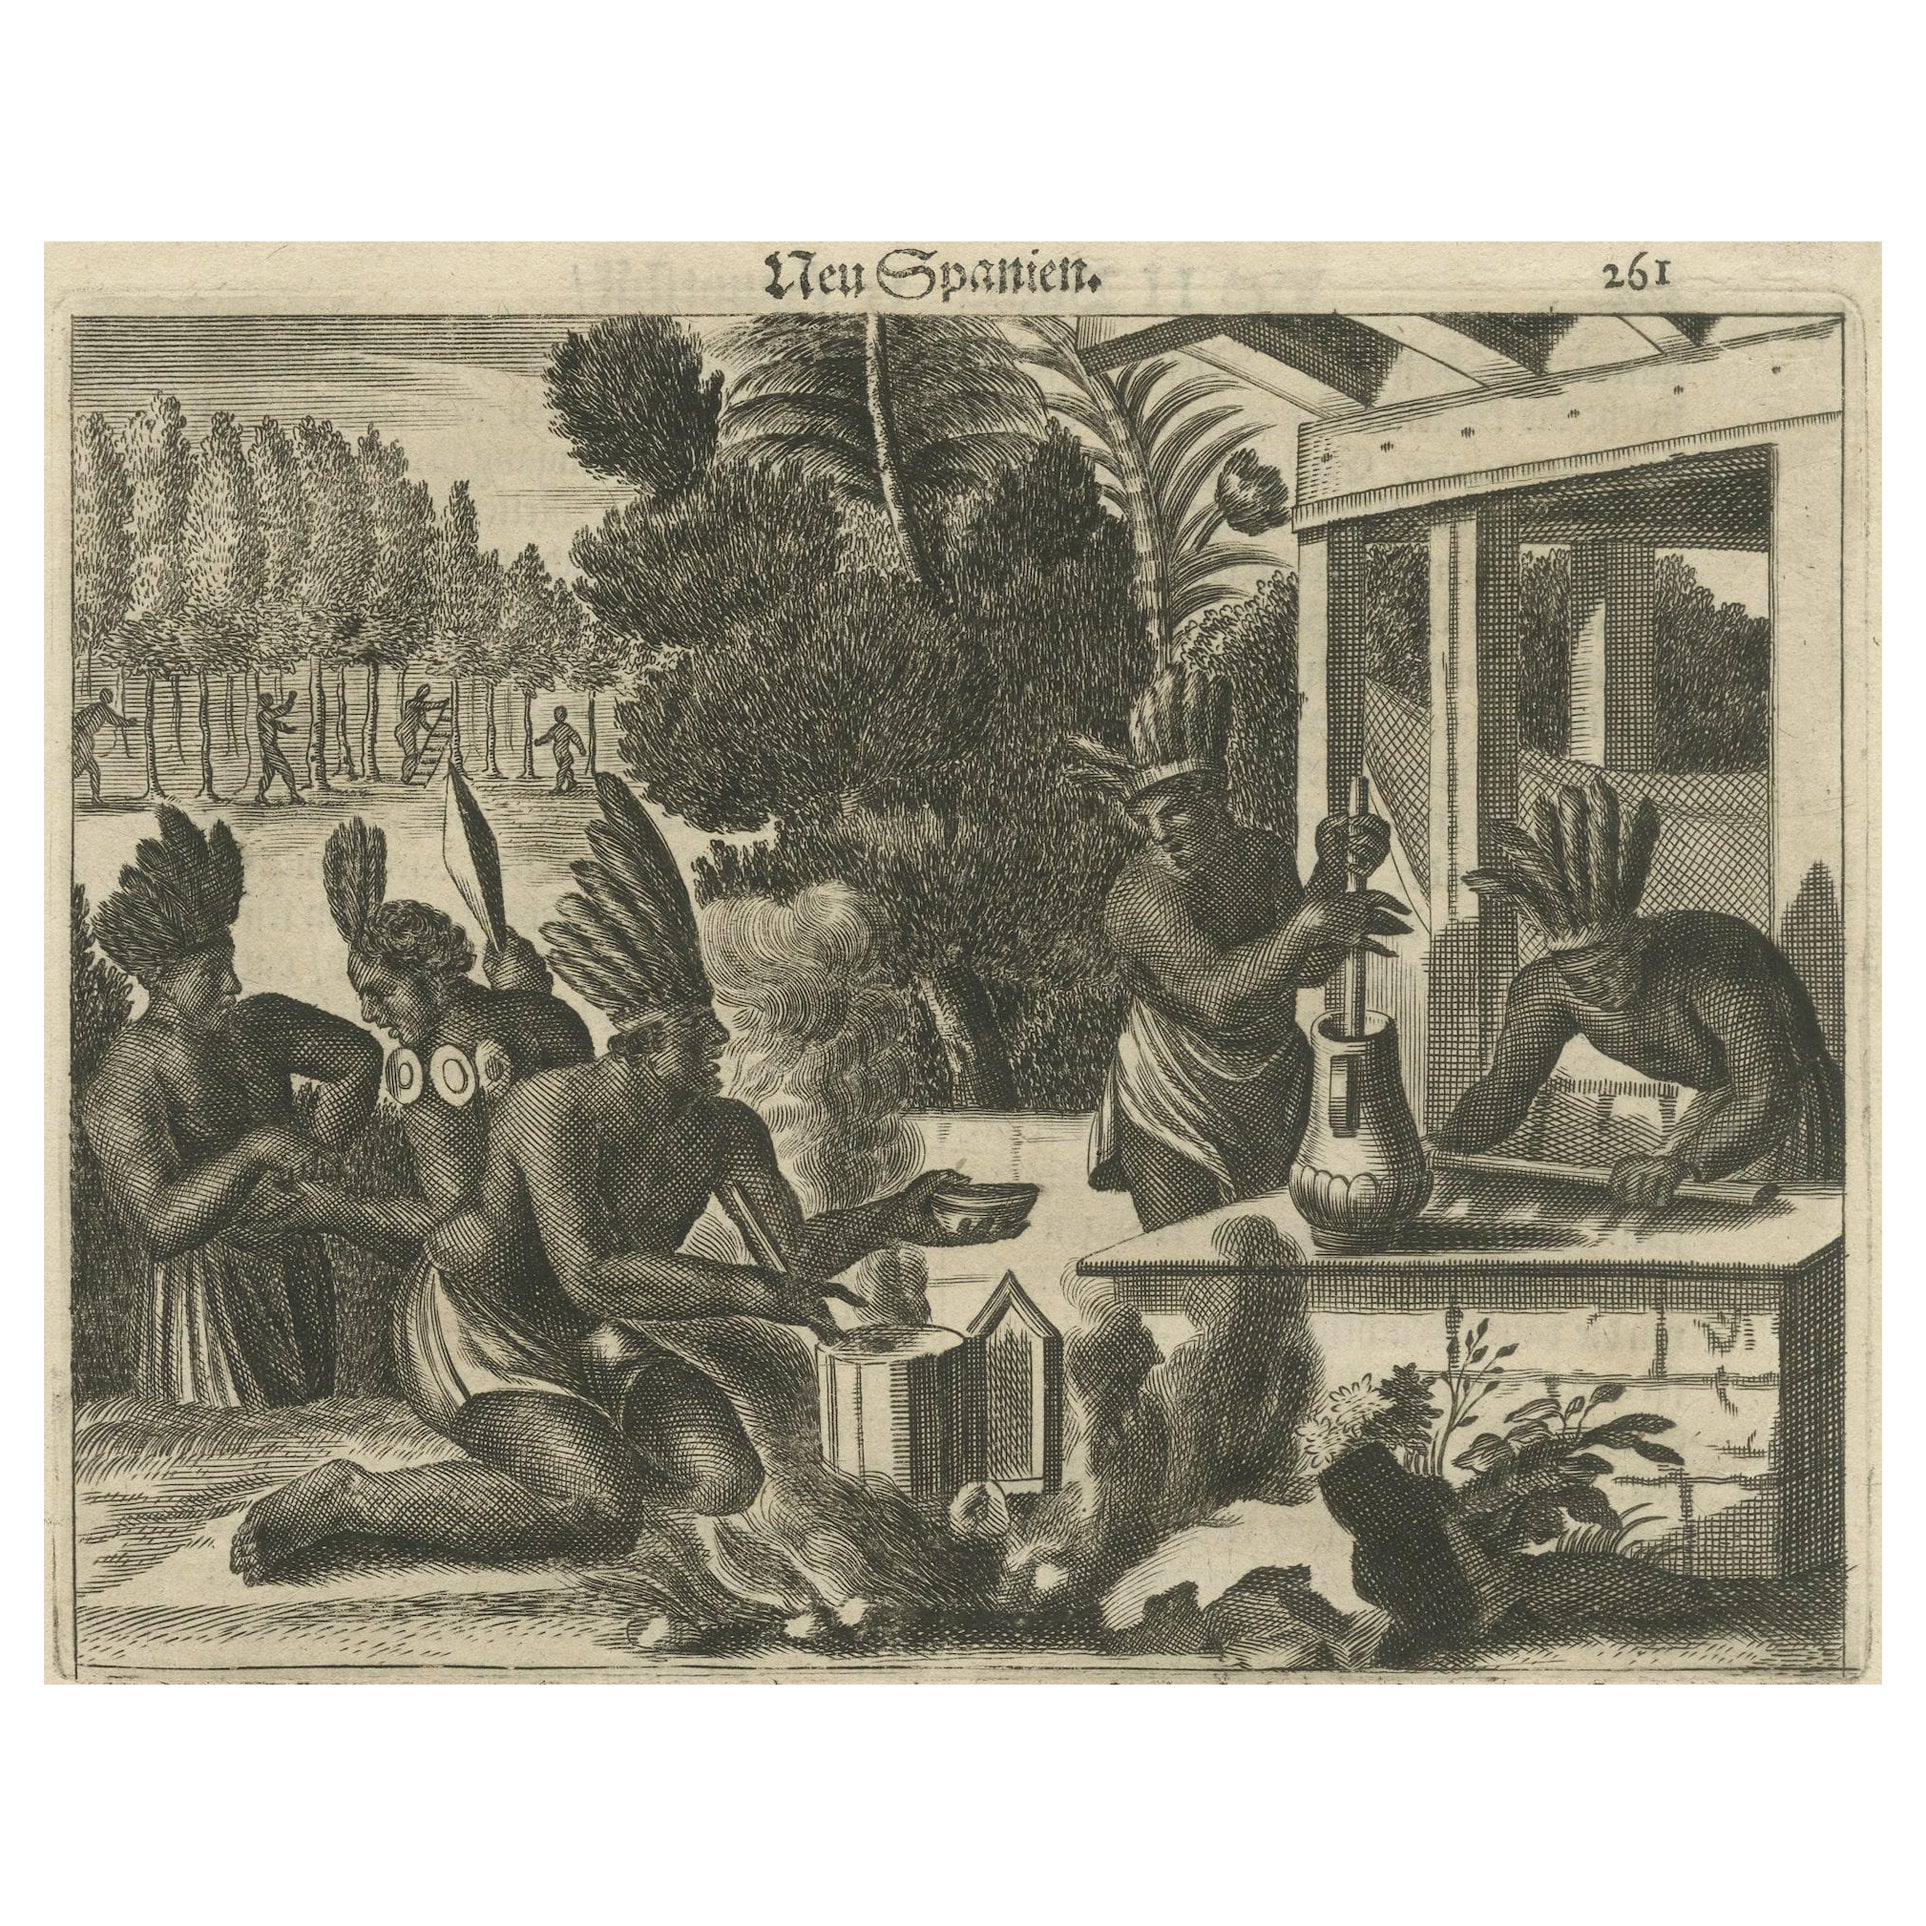 Copper Engraving of Daily Life in New Spain in The 17th Century, 1673